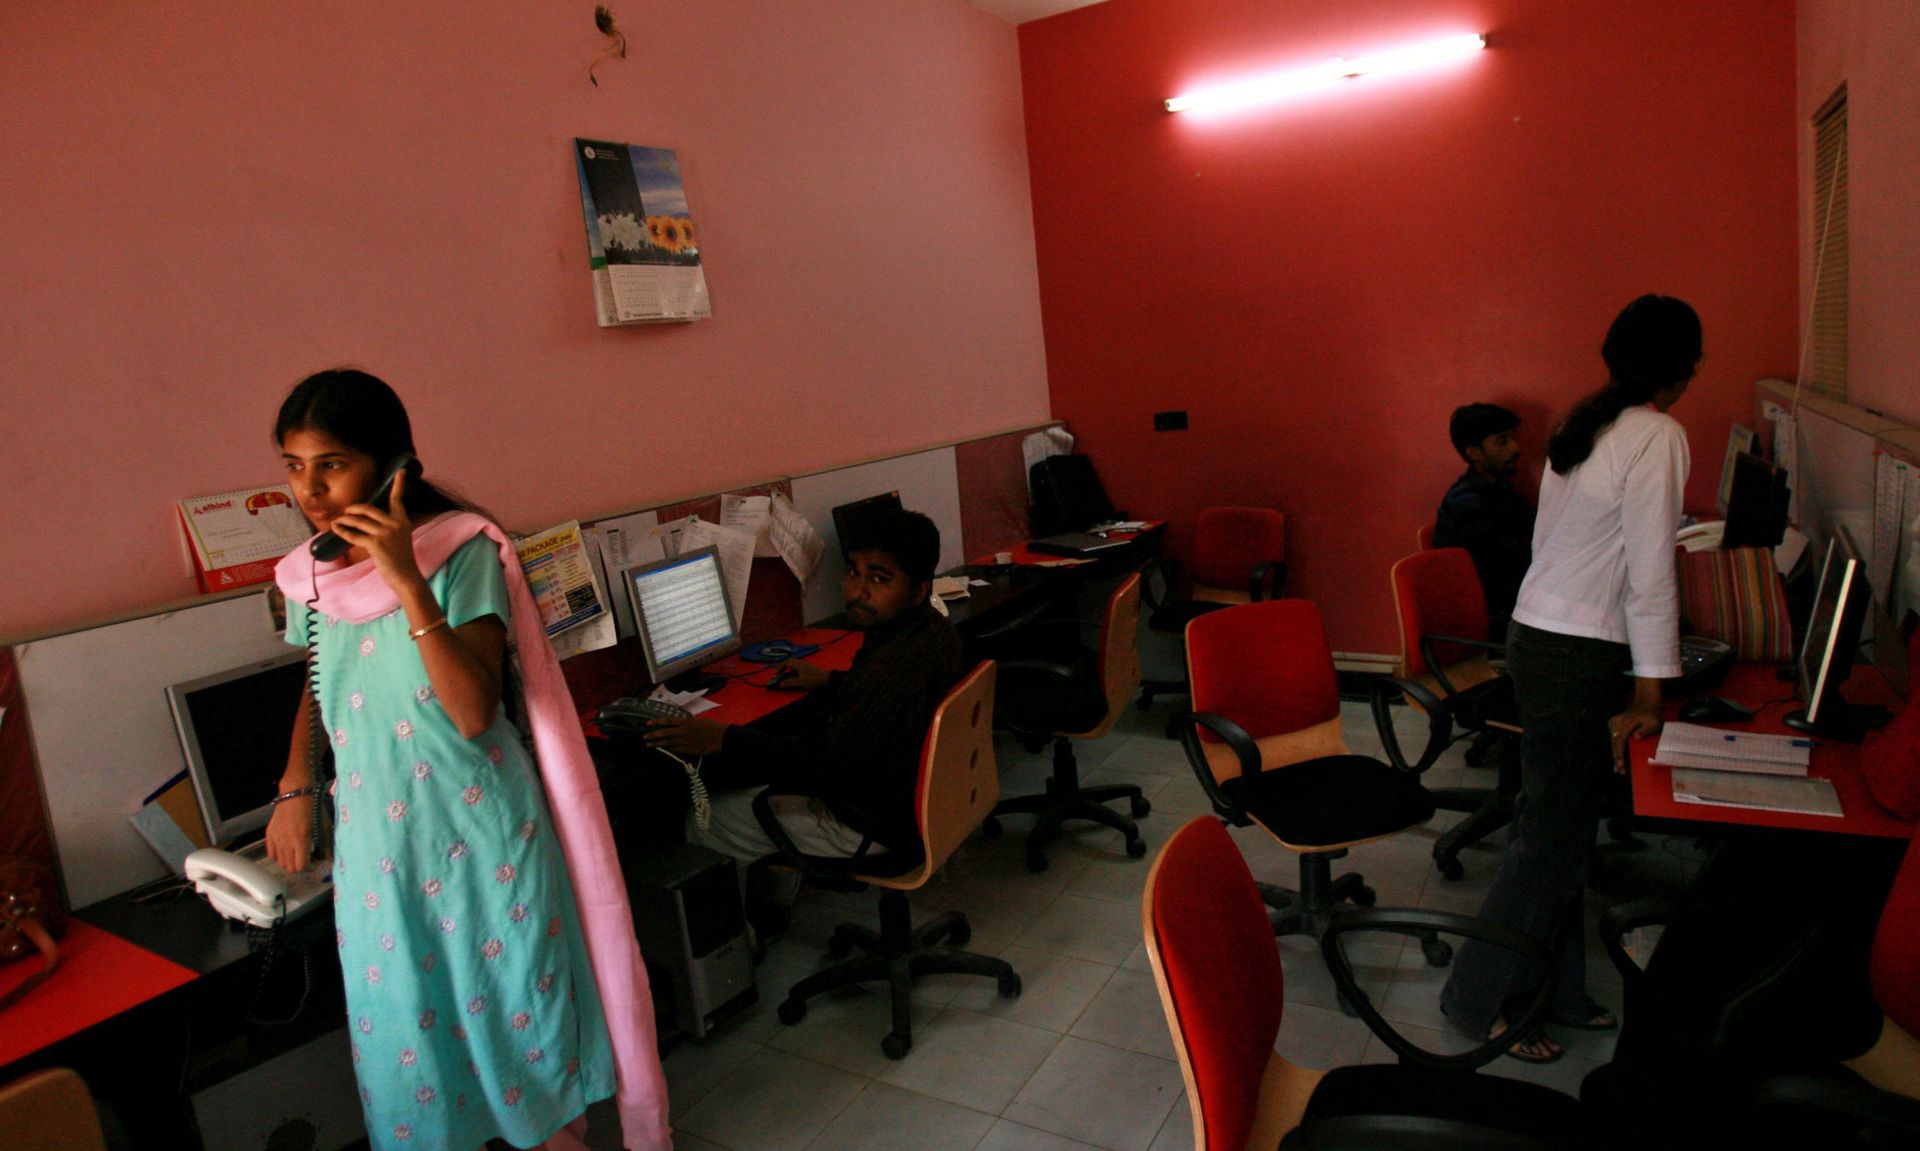 Employees work at an Indian startup headquarters April 12, 2008 in Bangalore, India. India is among the countries how various countries contending with this gender disparity like the U.S.  (Photo by Uriel Sinai/Getty Images)